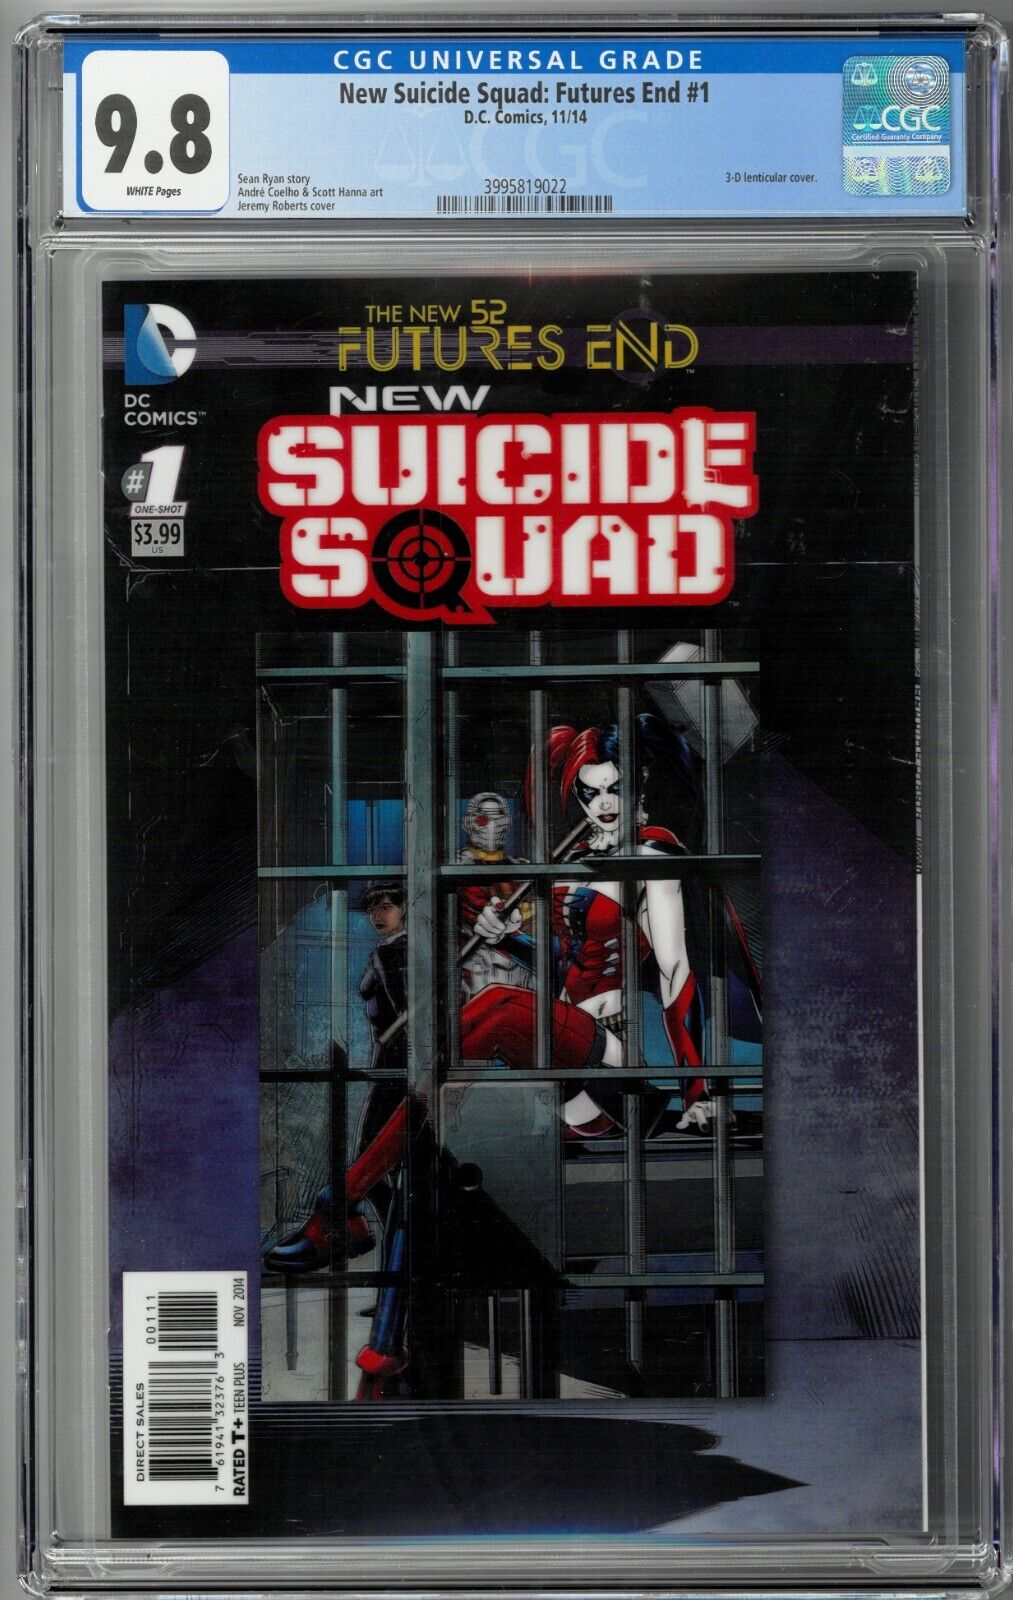 New Suicide Squad: Futures End #1 CGC 9.8 (Nov 2014, DC) Harley Quinn, 3-D Cover